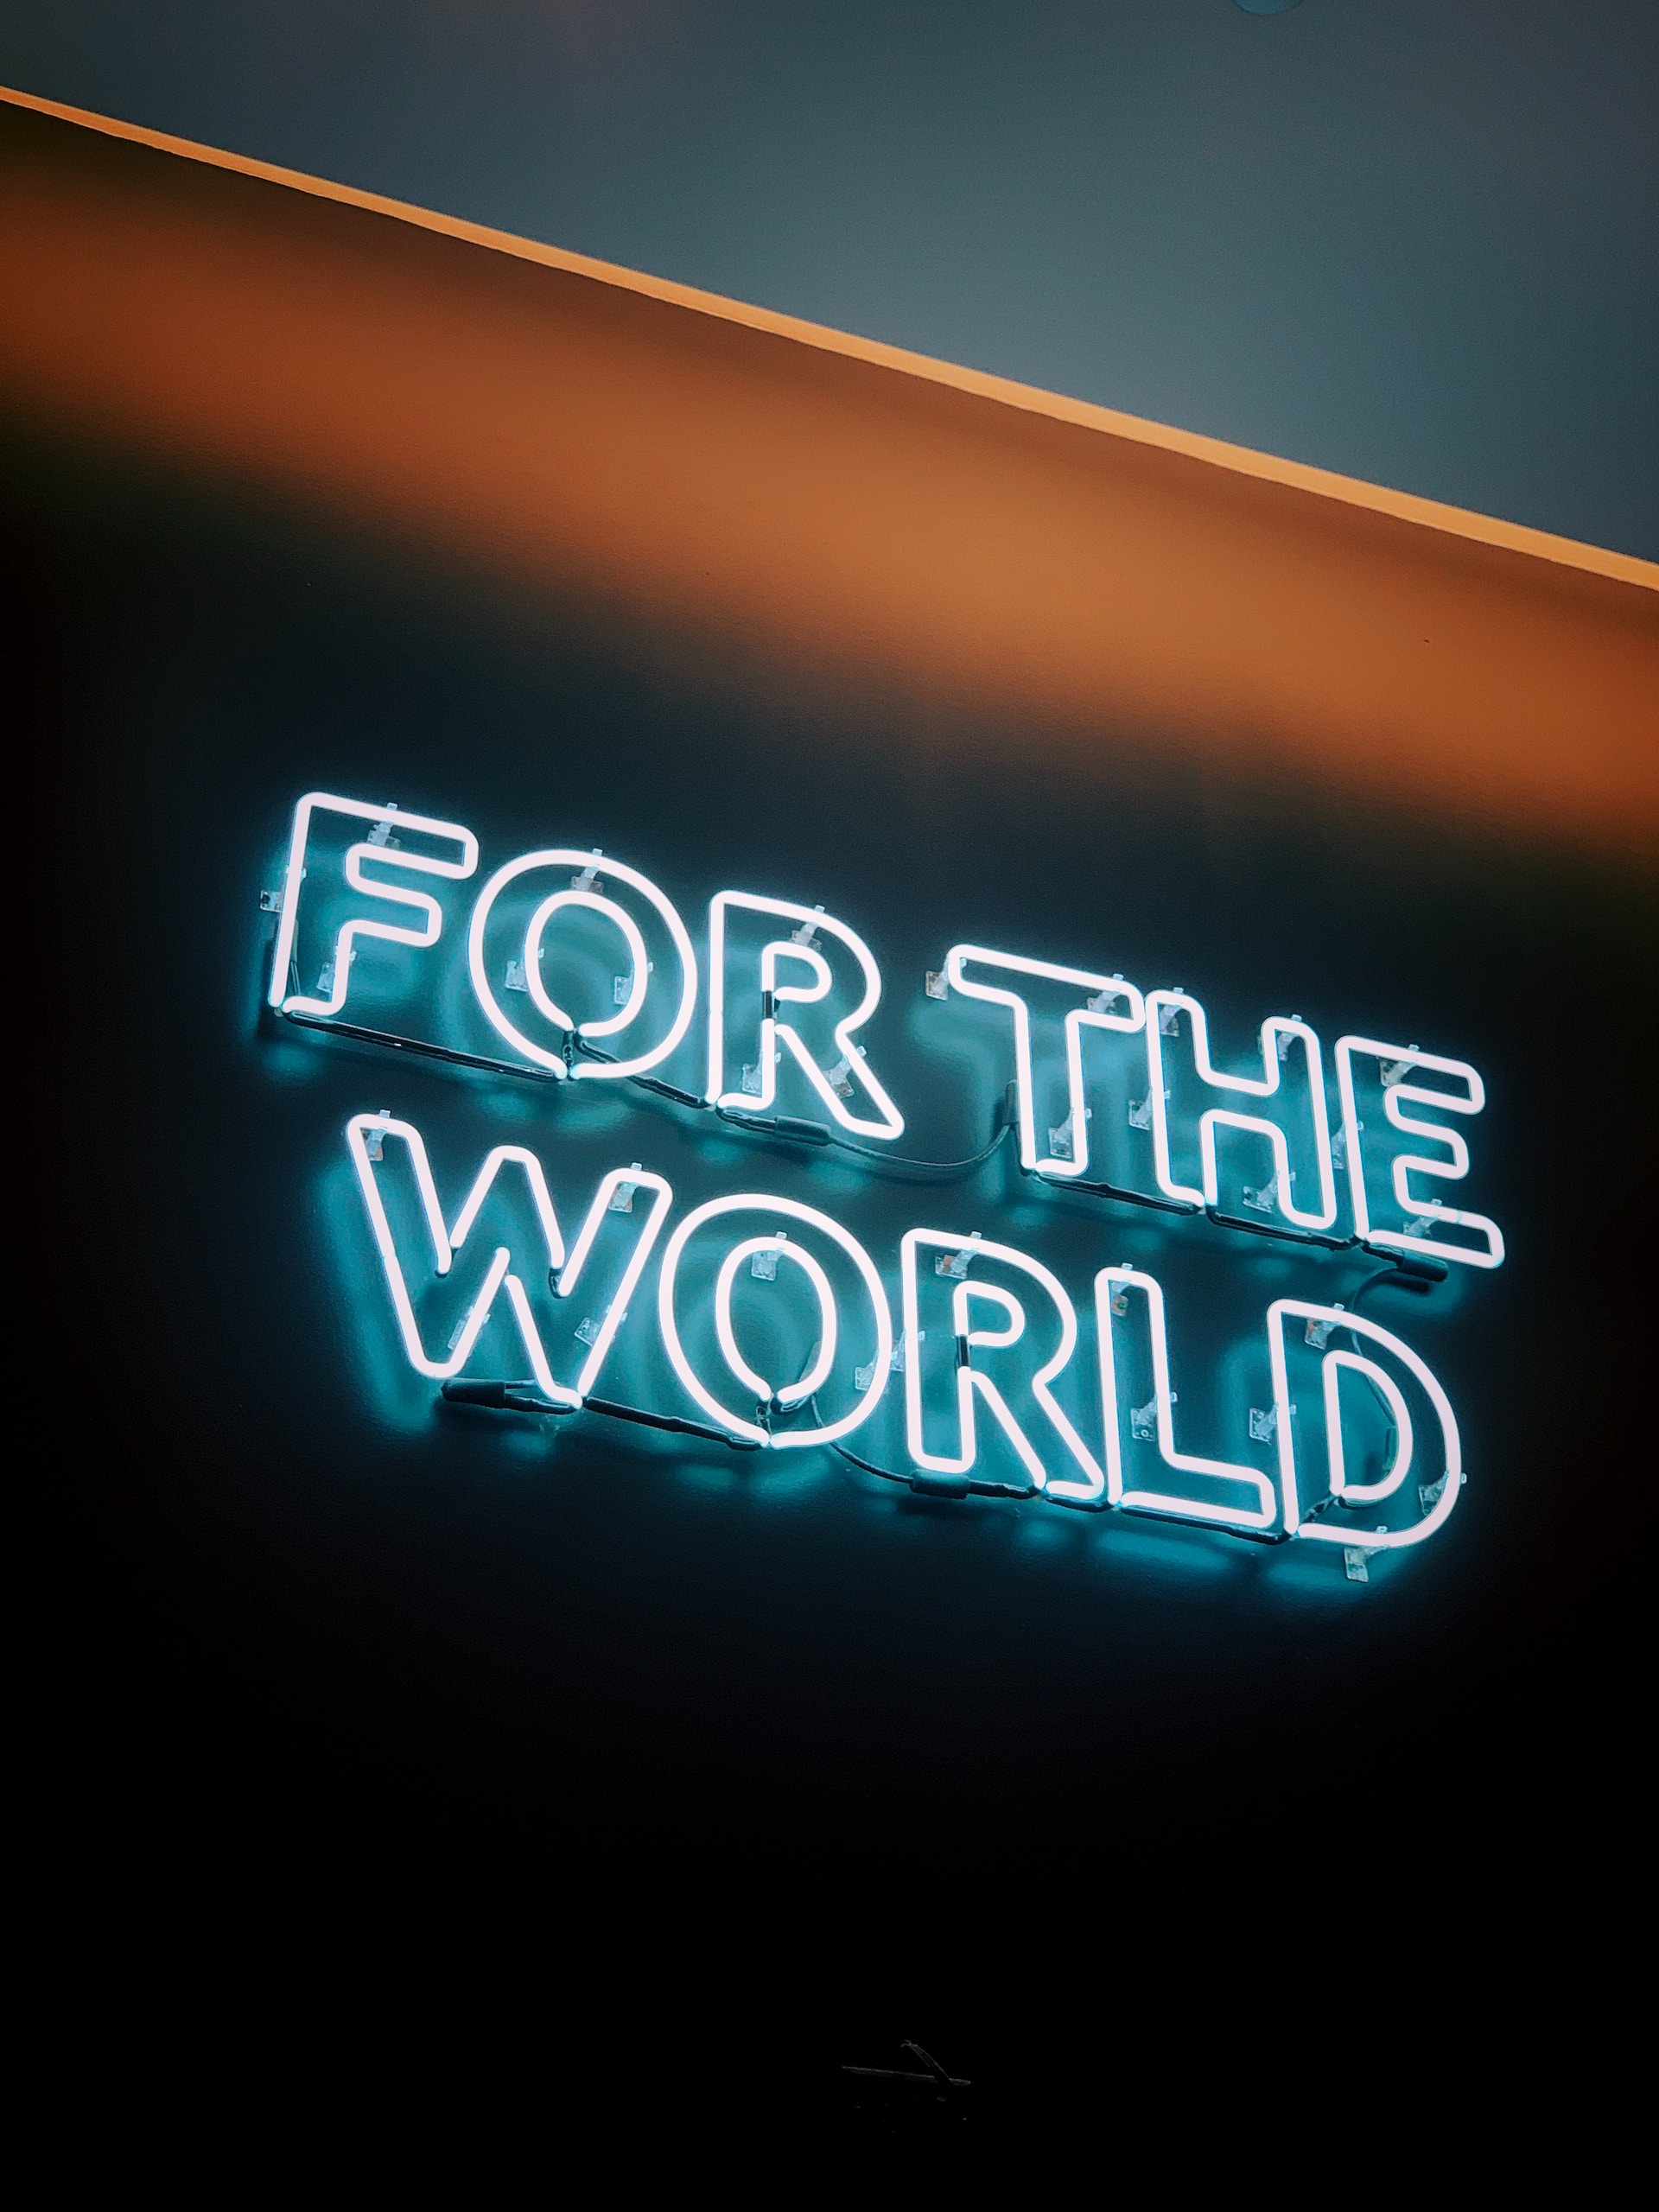 Neon sign with text saying For the world.